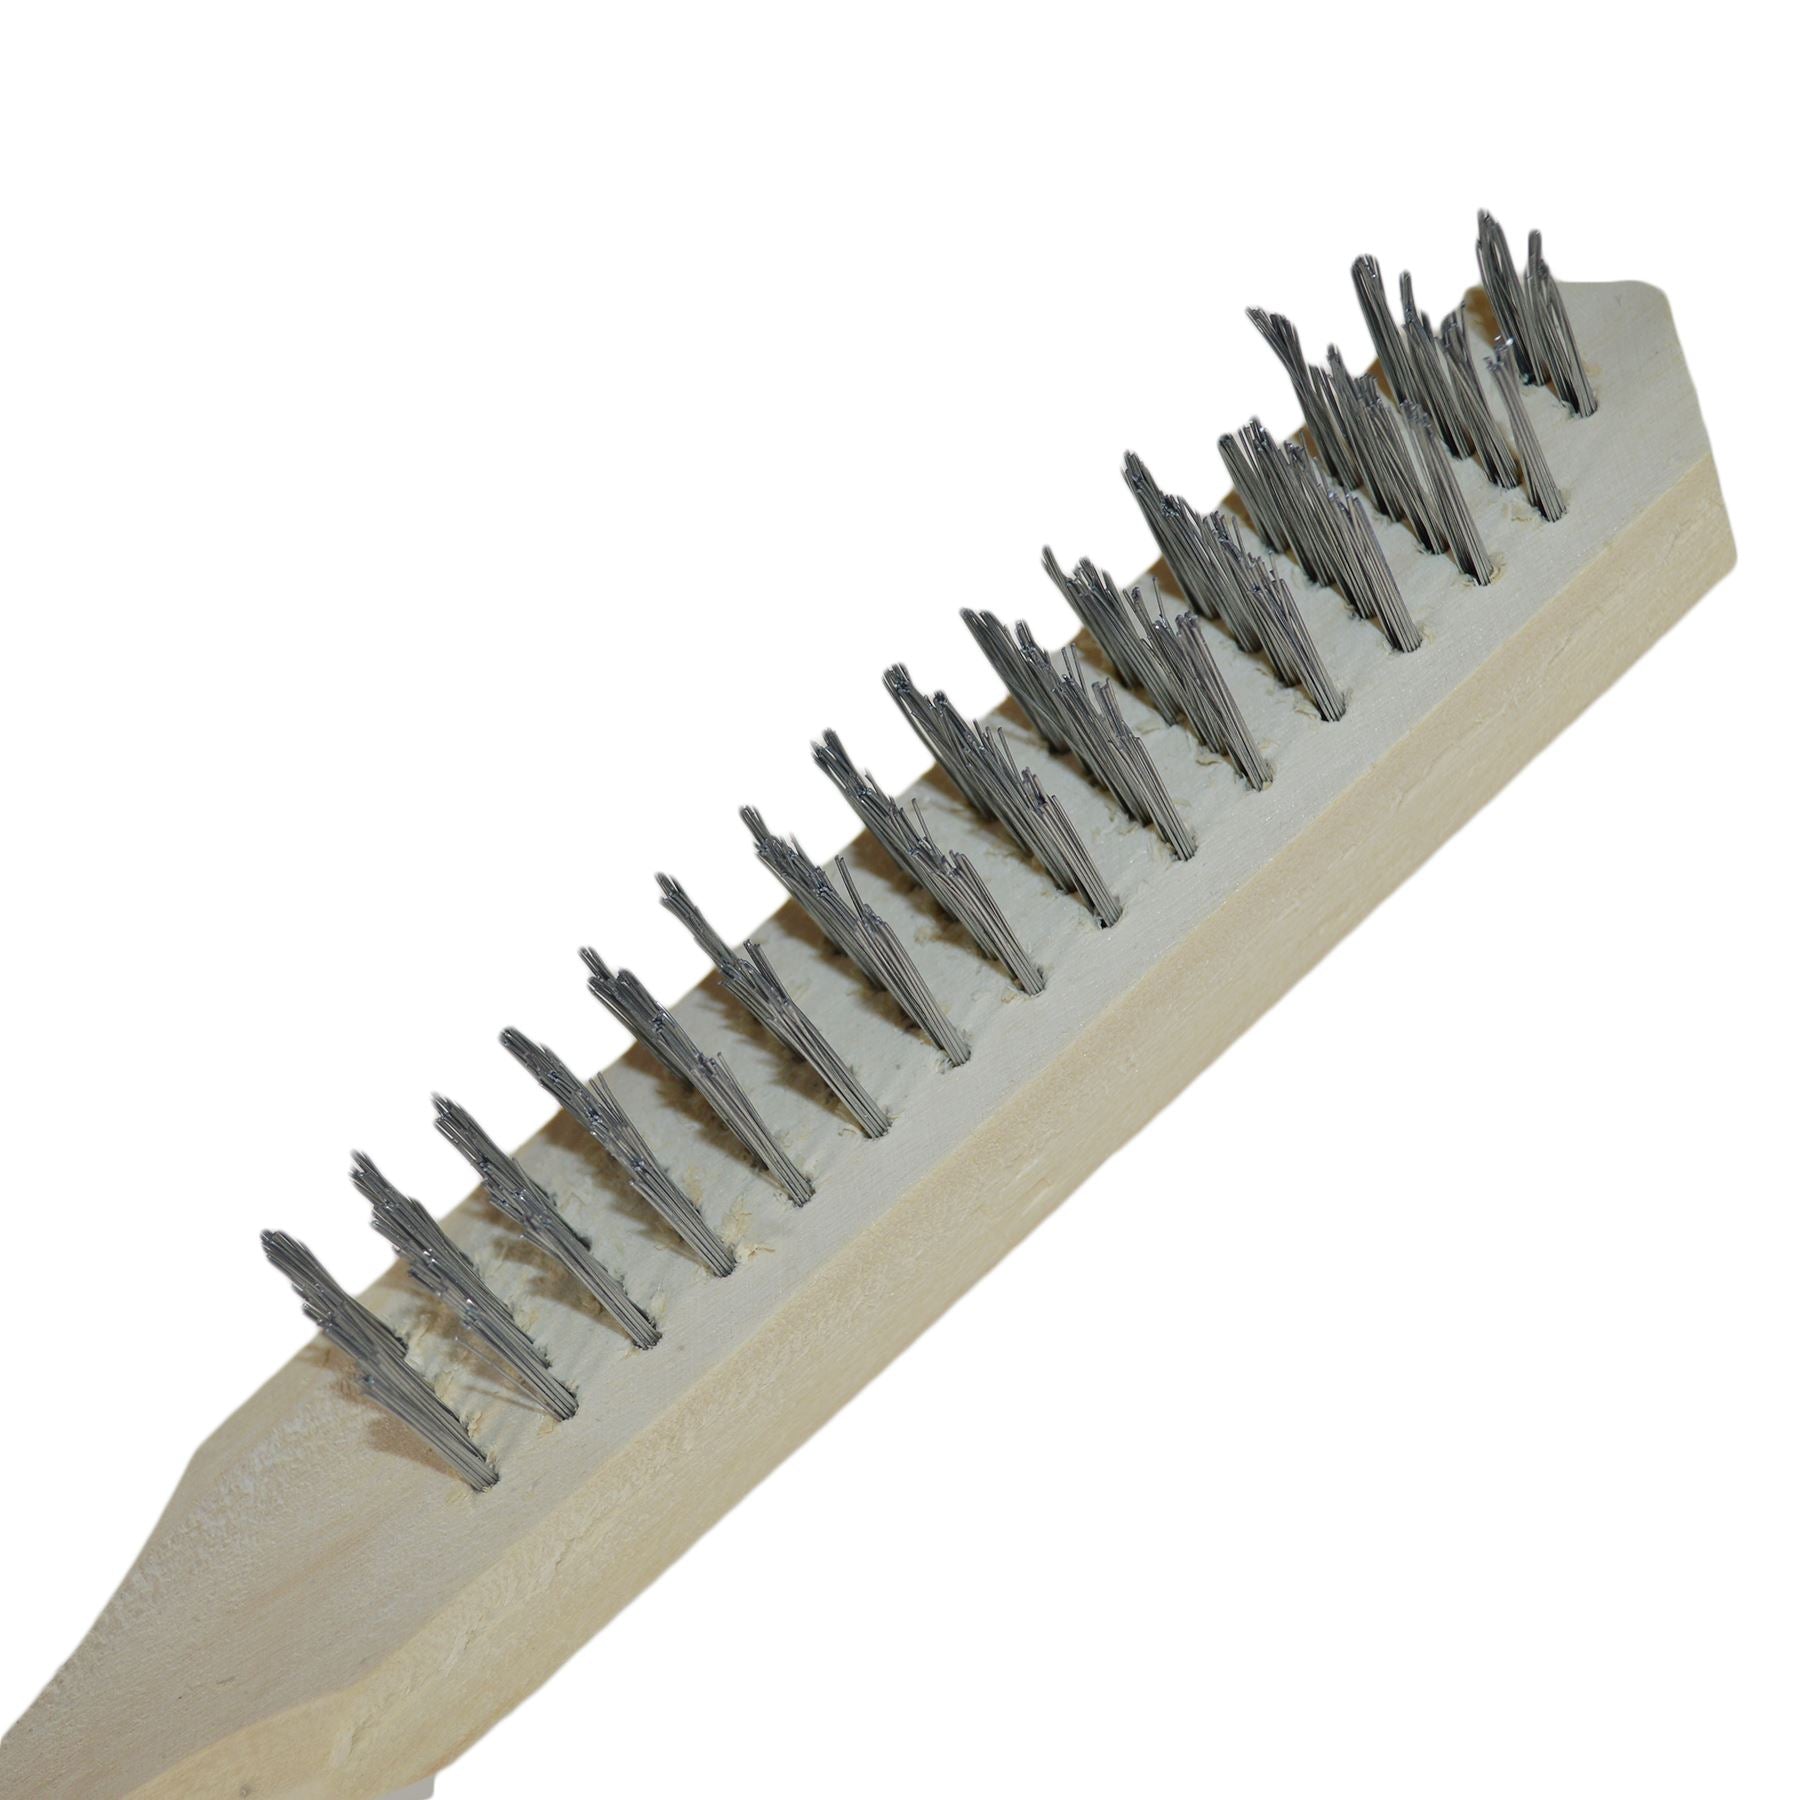 Wire Cleaning Brush 4 Rows Of Steel Wire Bristles With Wooden Handle 10 Pack